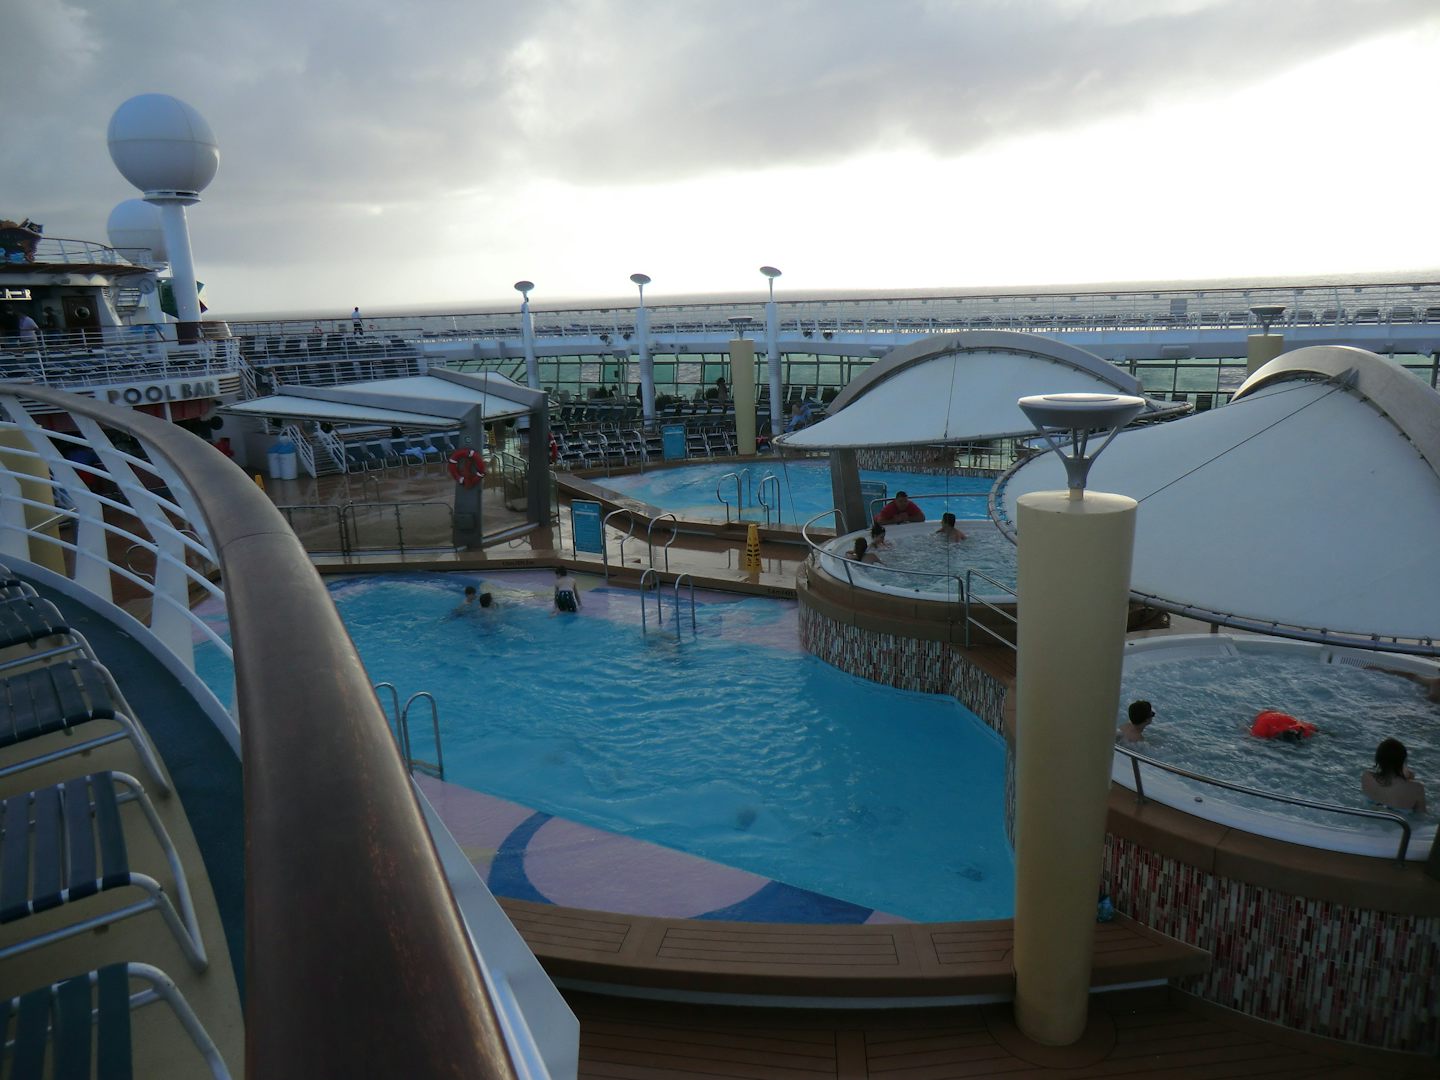 view of the middle of the ship pool area